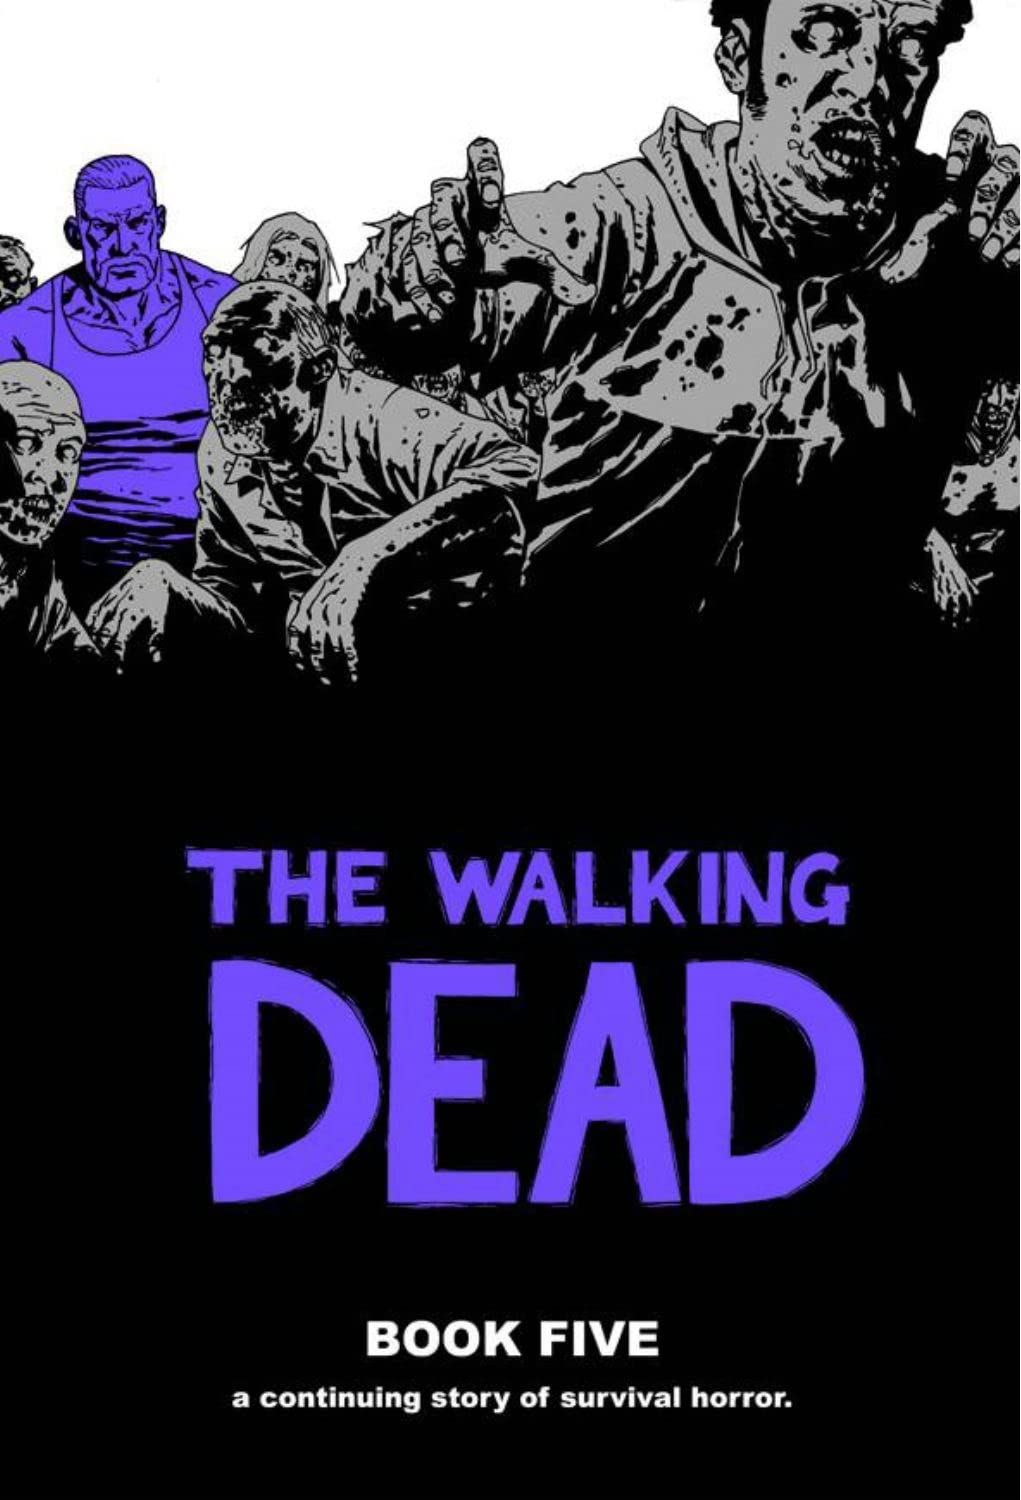 The Walking Dead Book Five Hardcover 2010